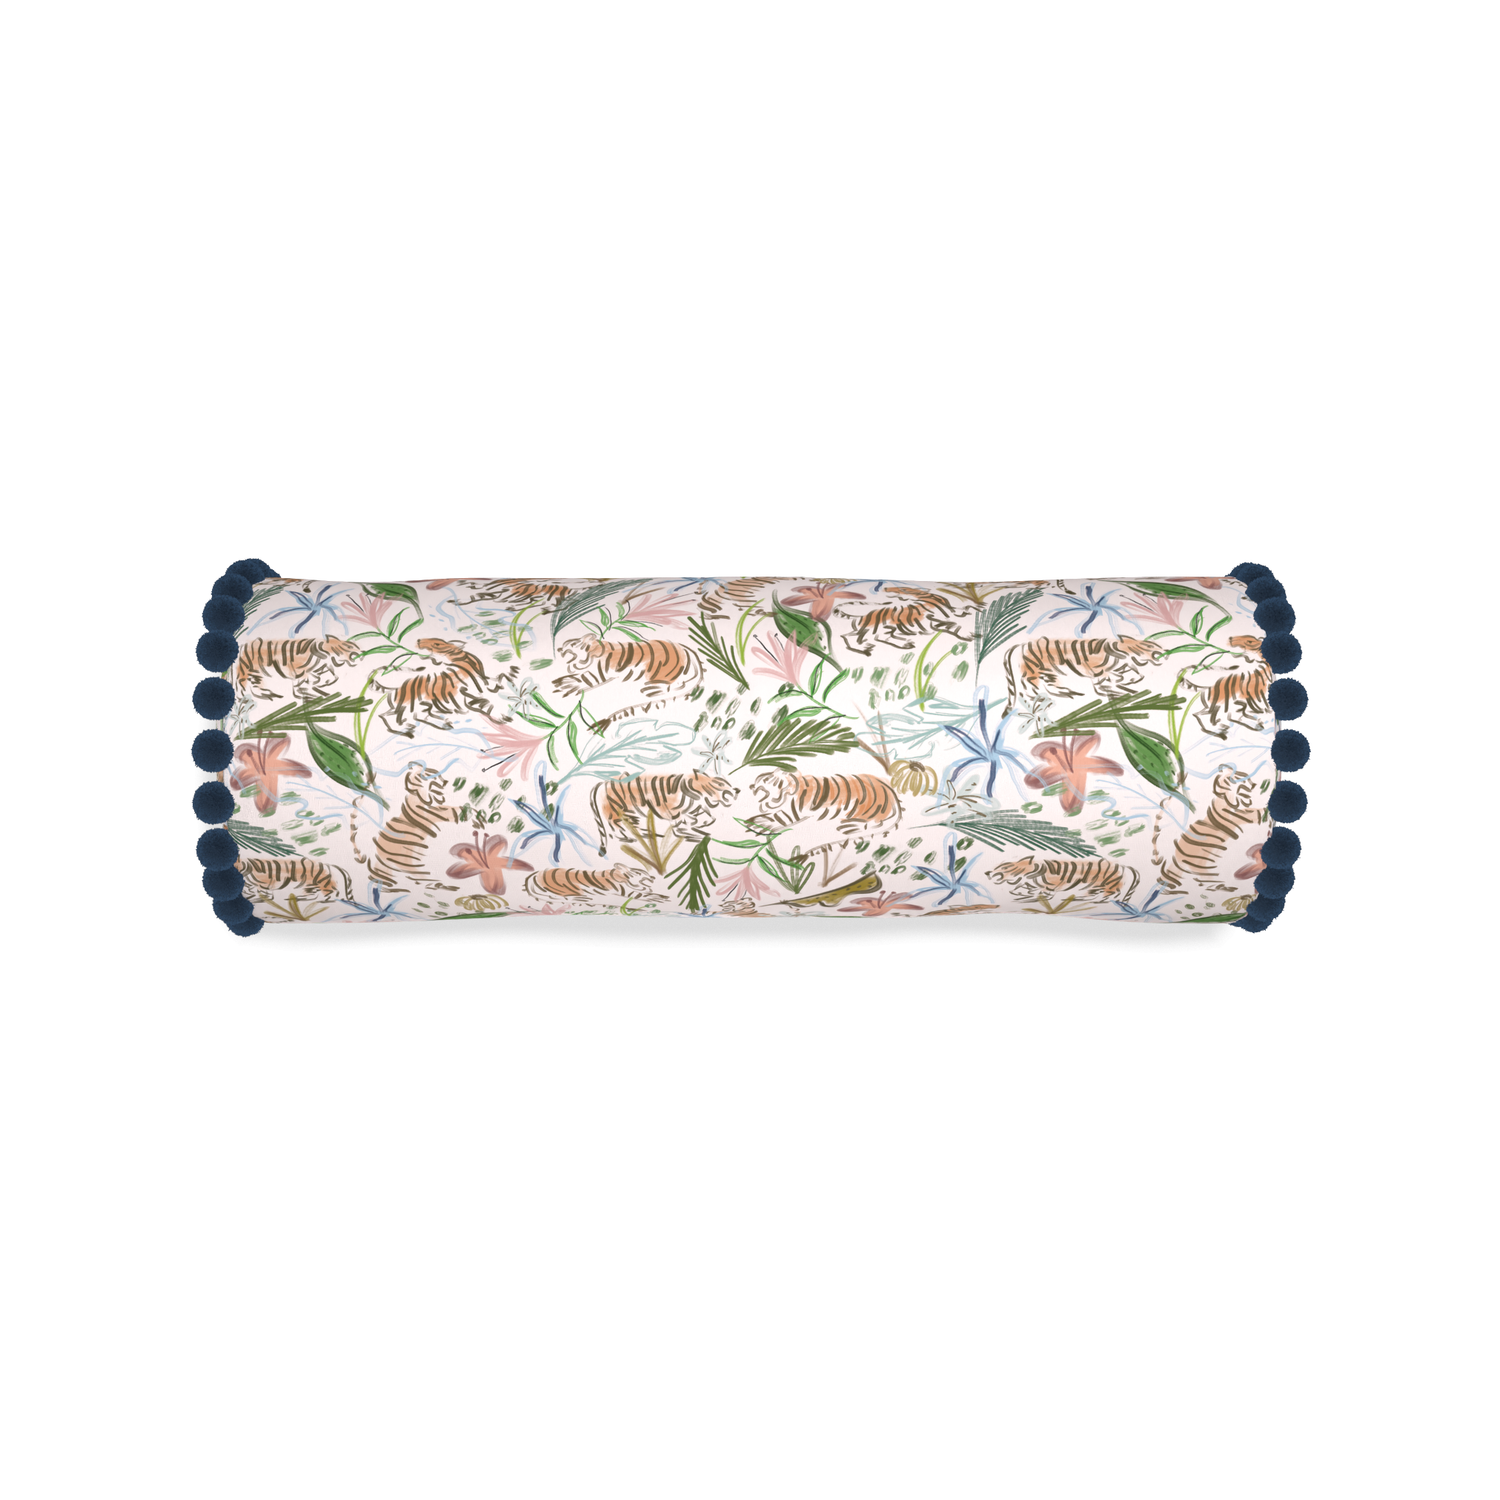 Bolster frida pink custom pink chinoiserie tigerpillow with c on white background